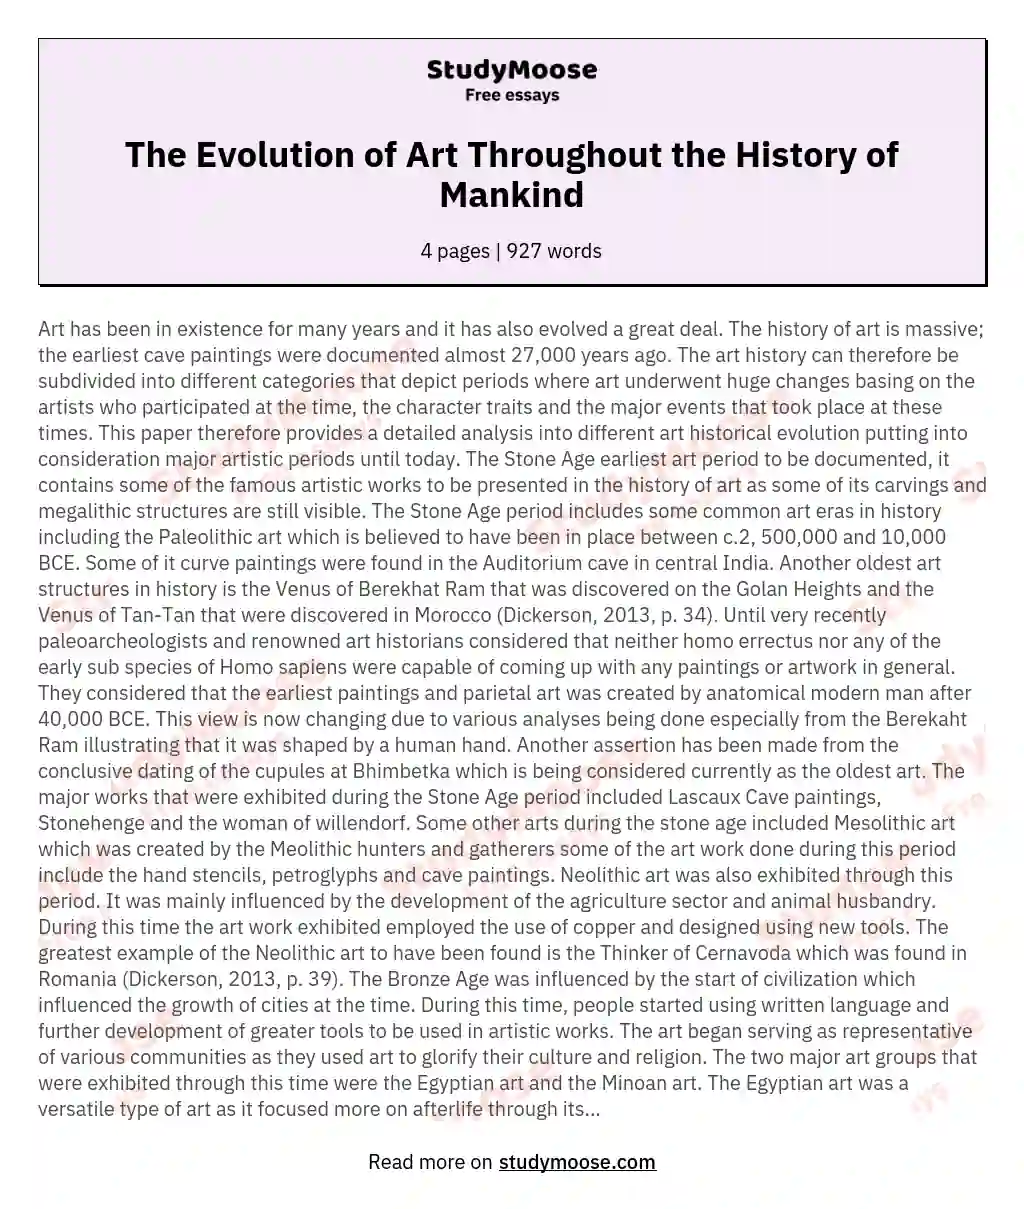 The Evolution of Art Throughout the History of Mankind essay